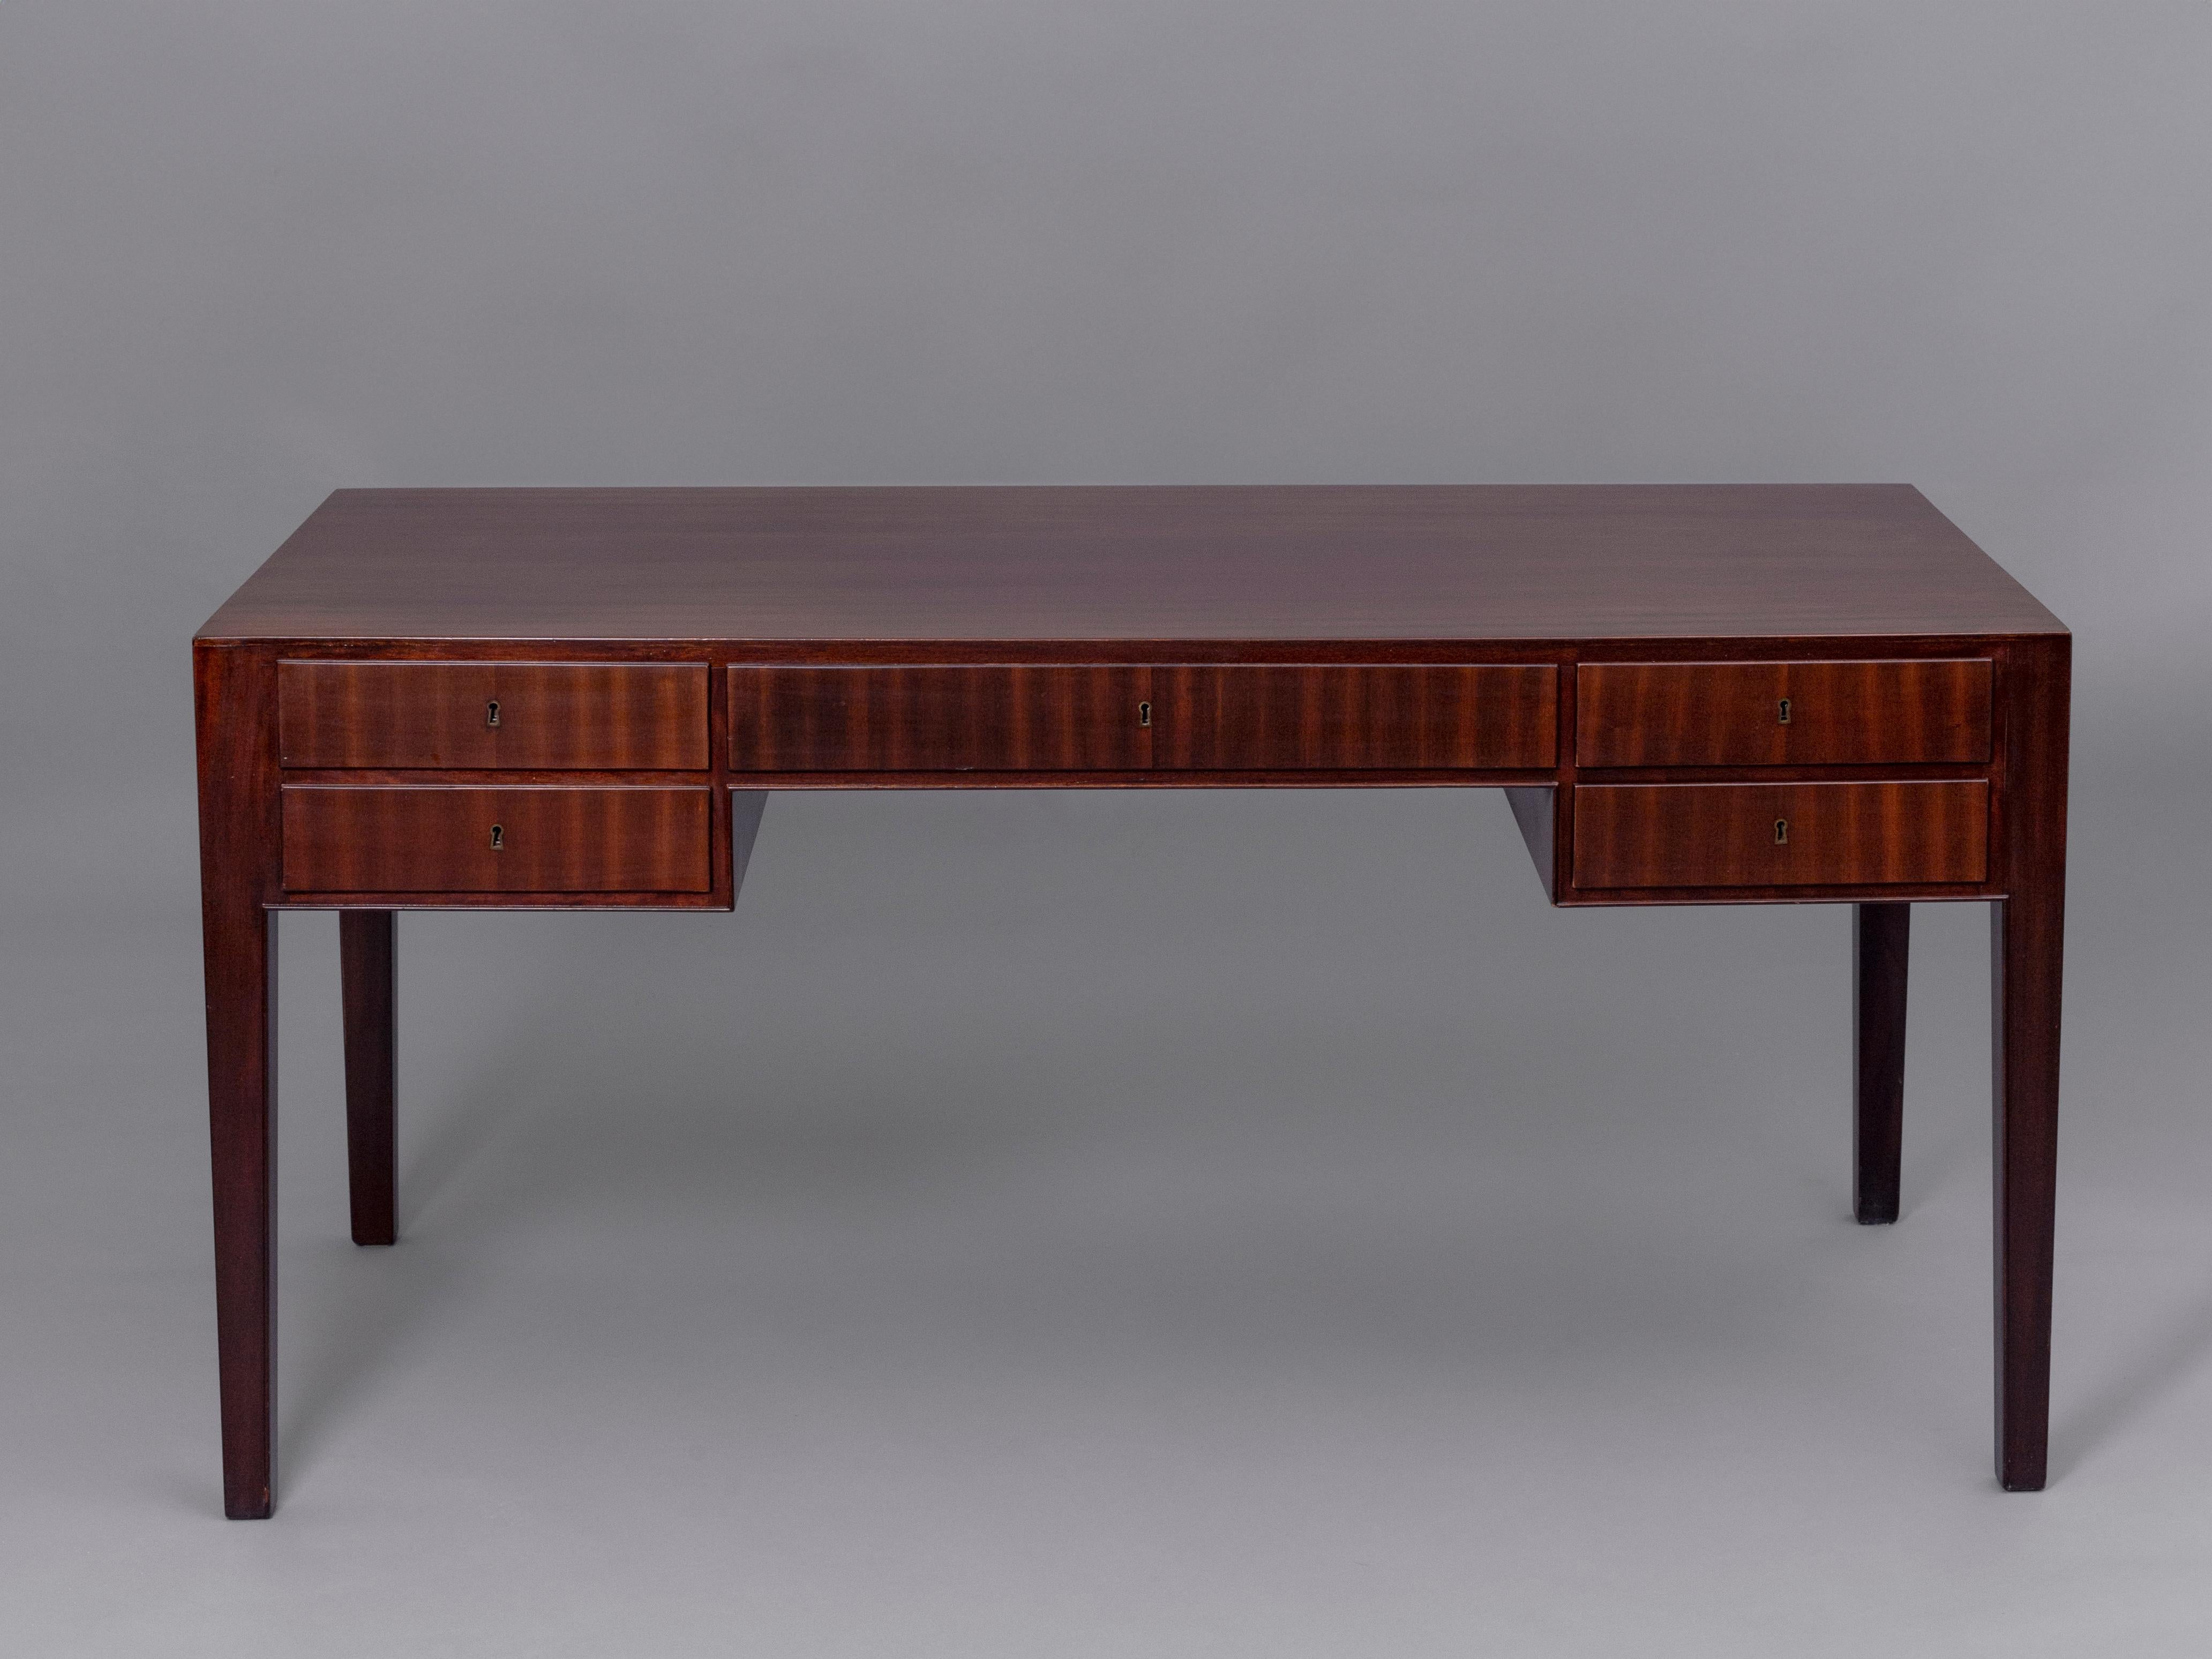 Mahogany desk designed by Ole Wanscher in an excellent restored condition. Denmark, 1960s 

This desk was designed following the mid century design rule and aesthetic, using noble woods in a precise and free of excessive decorative elements.